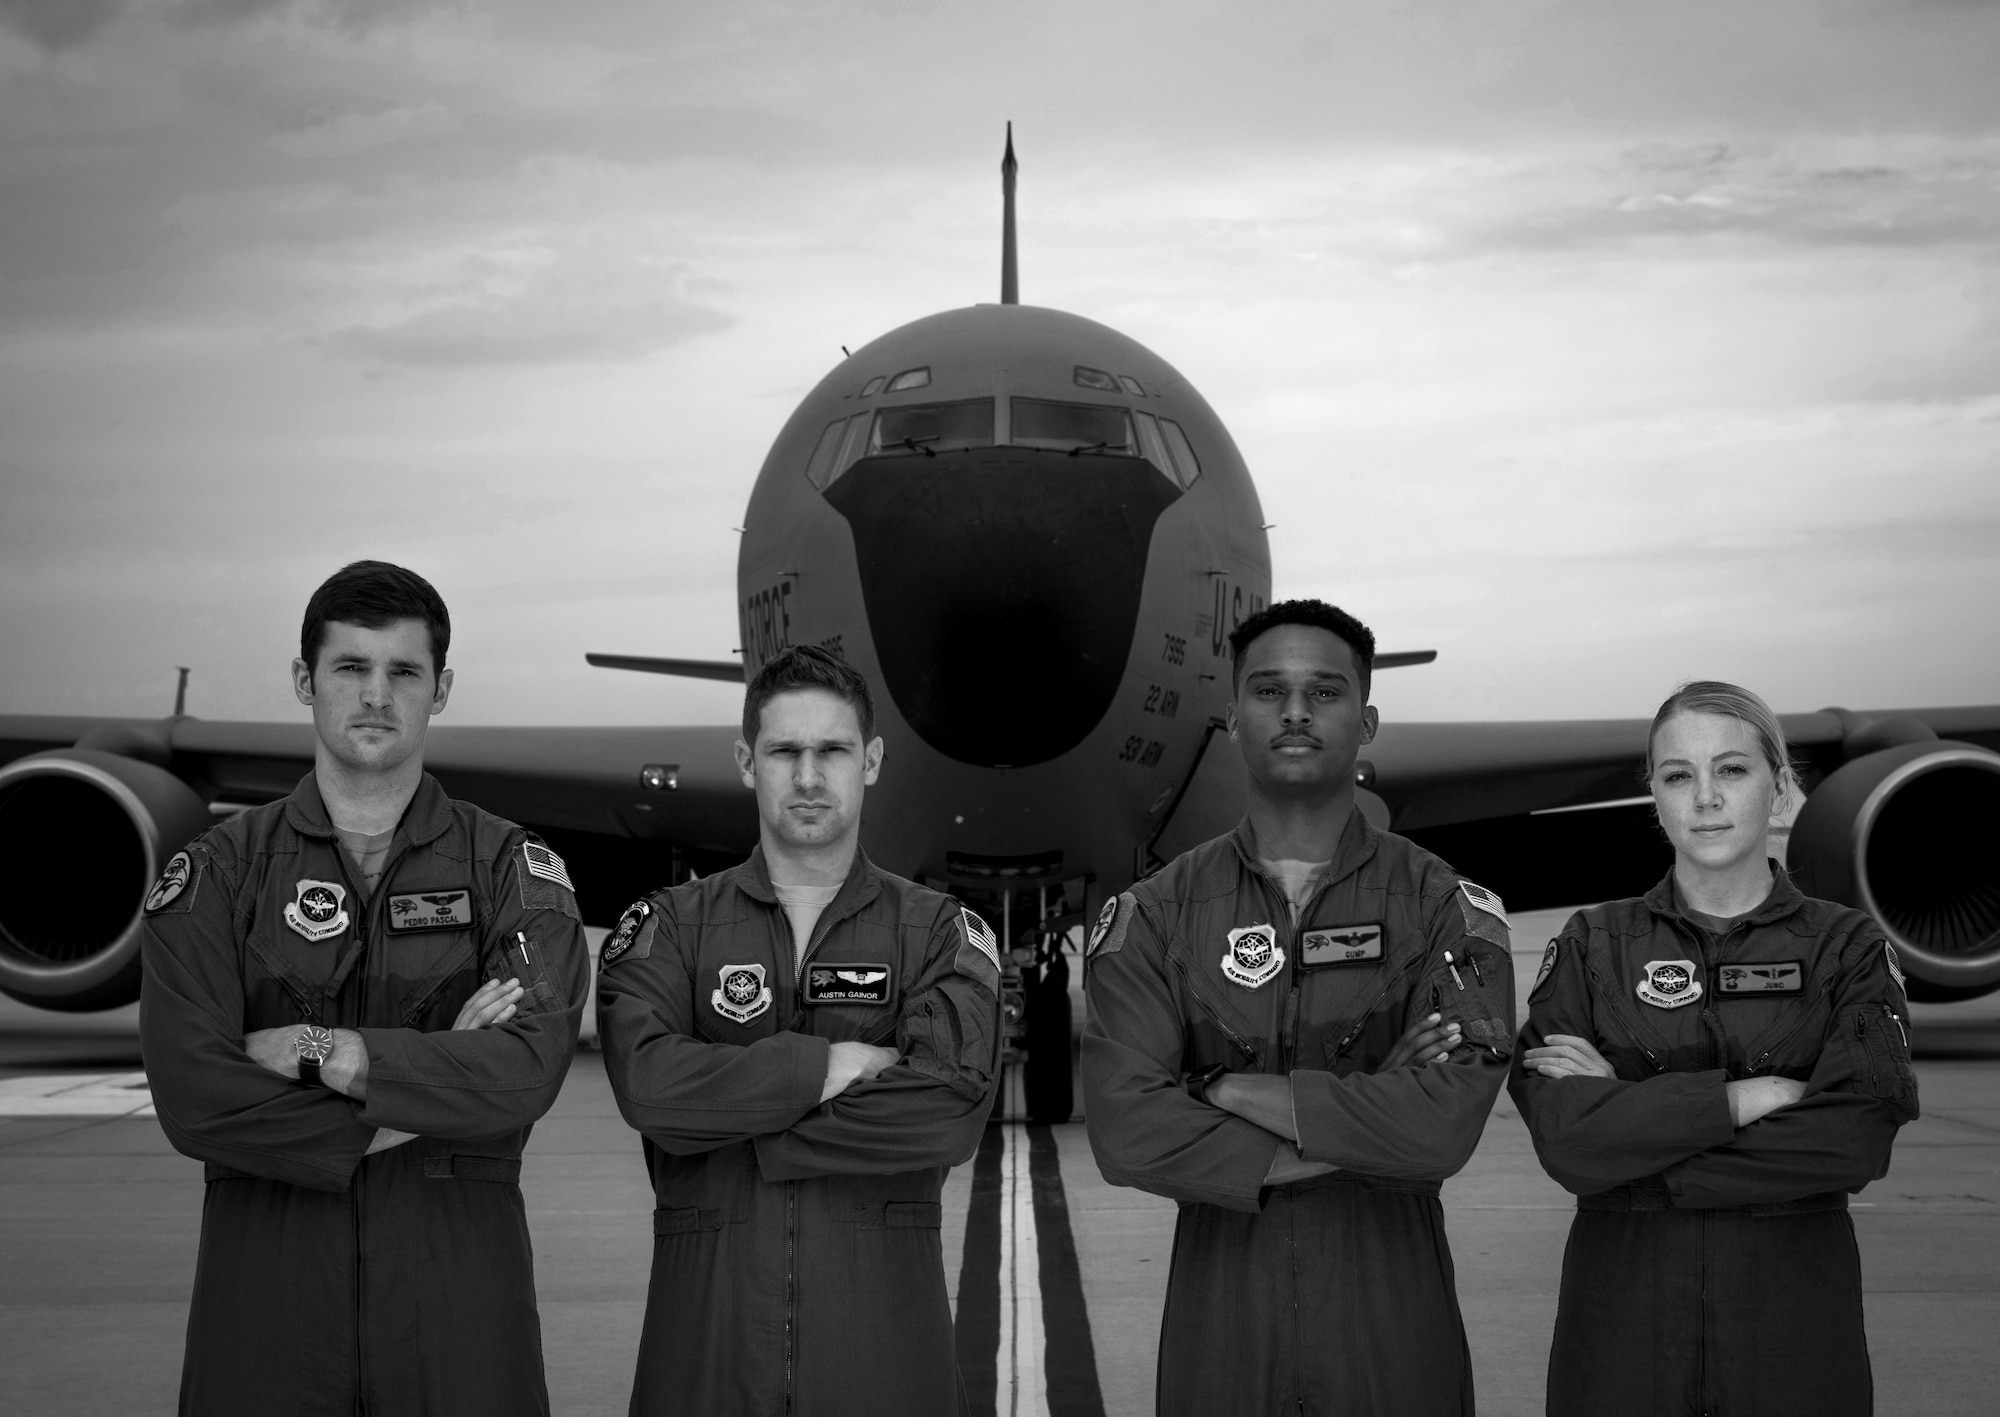 Pictured, from left, Capt. David Degroat, 350th Air Refueling Squadron deputy readiness chief, Capt. Austin Gainor, 350th ARS navigator, 1st Lt. Rico Hilliard, 350th ARS KC-135 pilot, and Senior Airman Kelsey Tillotson, 350th ARS in-flight refueling specialist, recently completed a multilateral exercise Sept. 2, 2020, at McConnell Air Force Base, Kansas. McConnell provides critical Special Operations Air Refueling capabilities for MLATs, which are training missions that include multiple branches of the military. (U.S. Air Force photo by Senior Airman Michaela R. Slanchik)